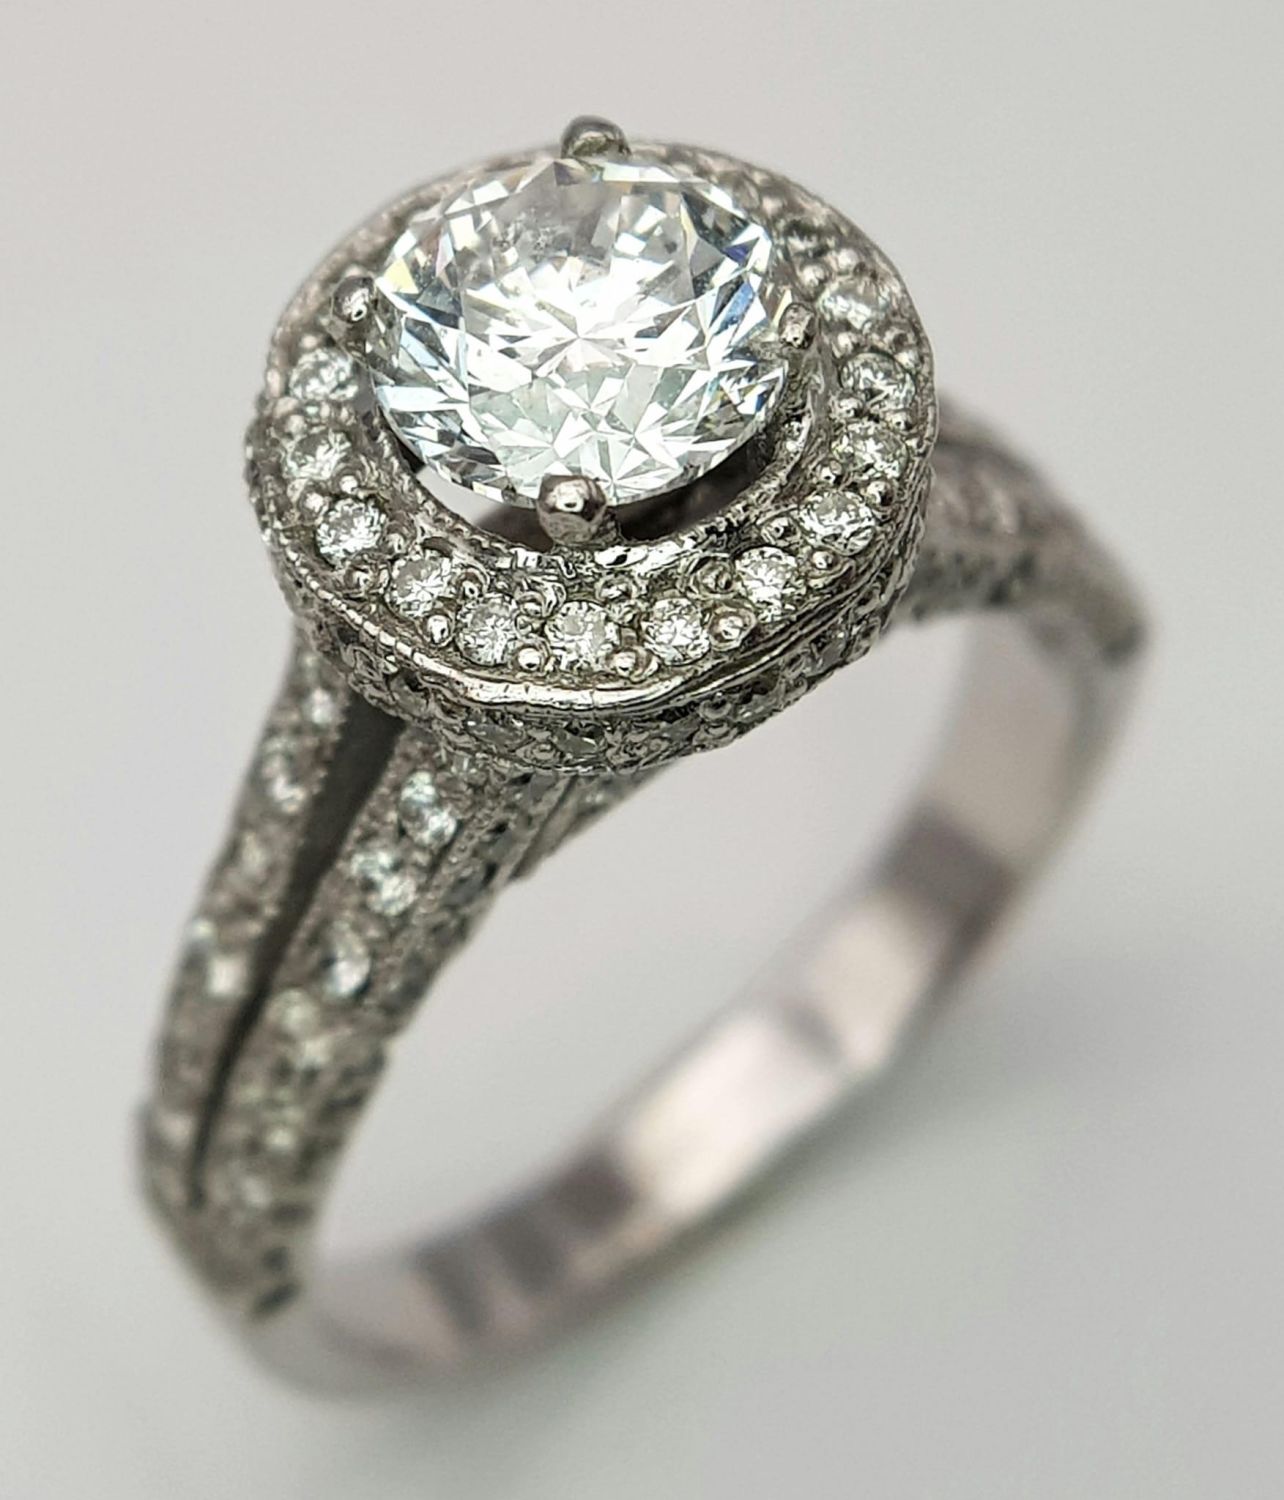 An 18 K white gold ring with a brilliant cut diamond (1.01 carats) surrounded by diamonds on the top - Image 17 of 22